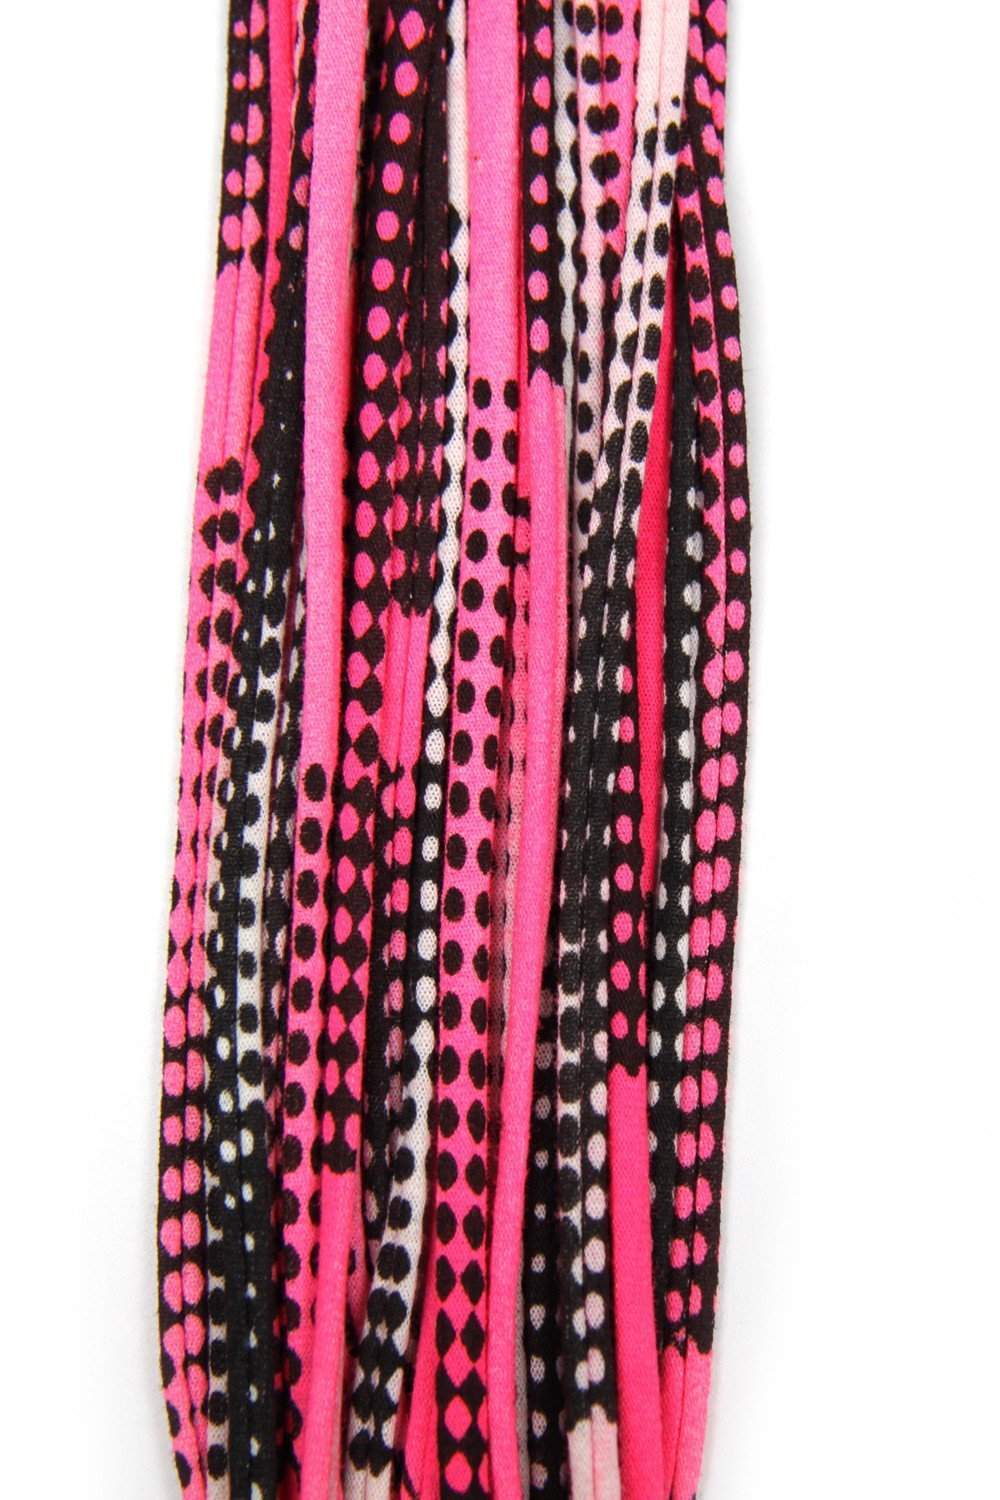 infinity scarves-Hot Pink Black Infinity Scarf-Necklush